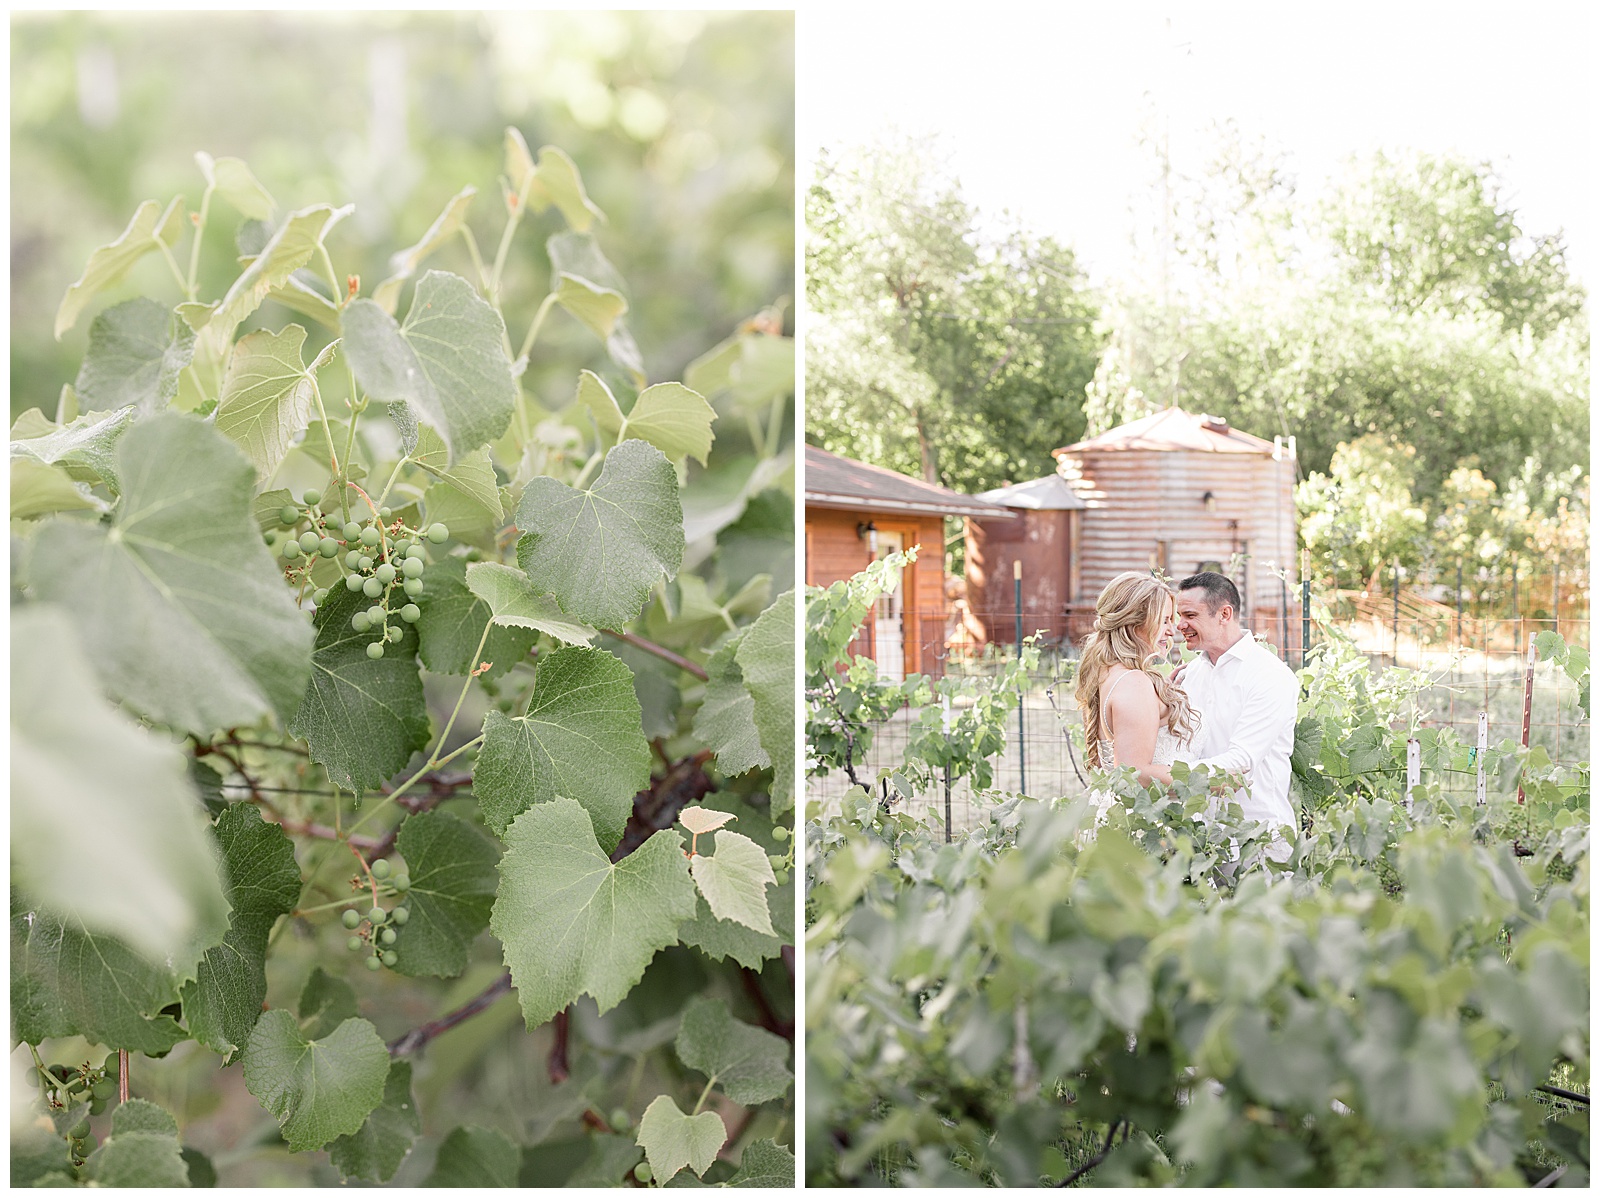 Vineyard gives way to elopement couple with silo in the background